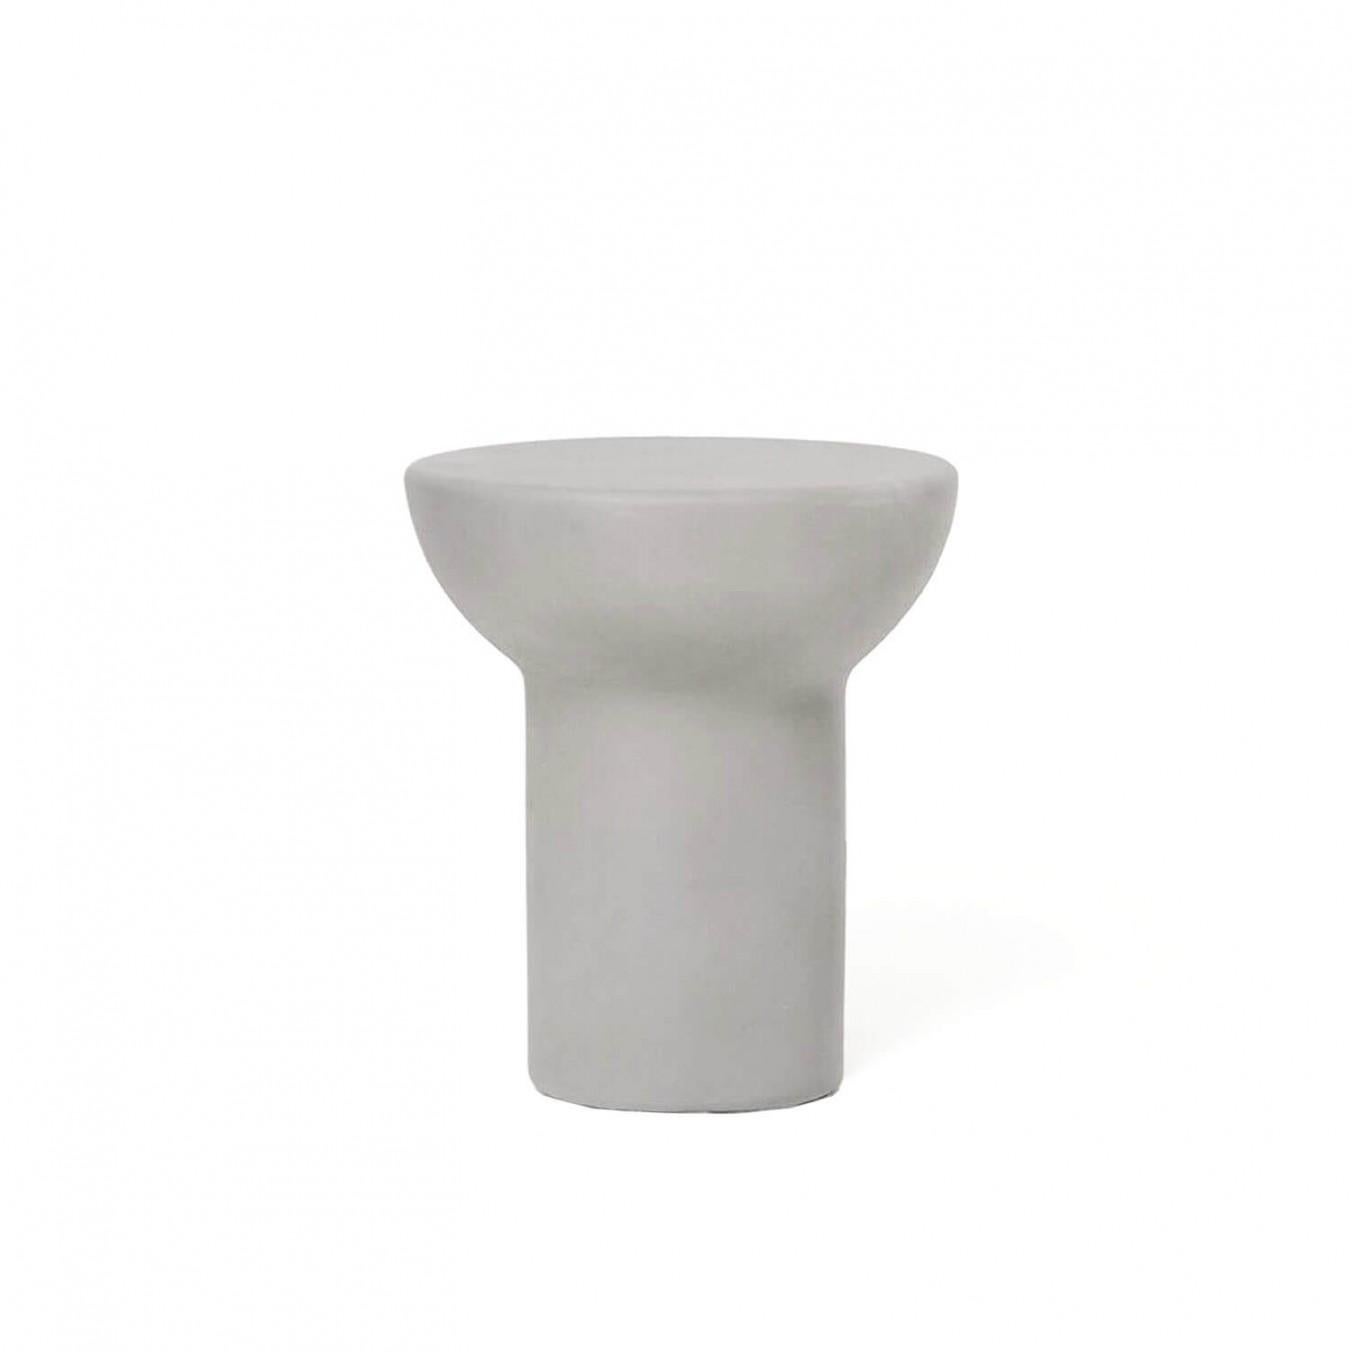 Contemporary cream plaster side table, roly-poly side table by Faye Toogood
This is shown in the cream plaster finish. 

Design: Faye Toogood
Material: Sealed Reinforced plaster
Available also in chalk, storm or charcoal finish

A side table,